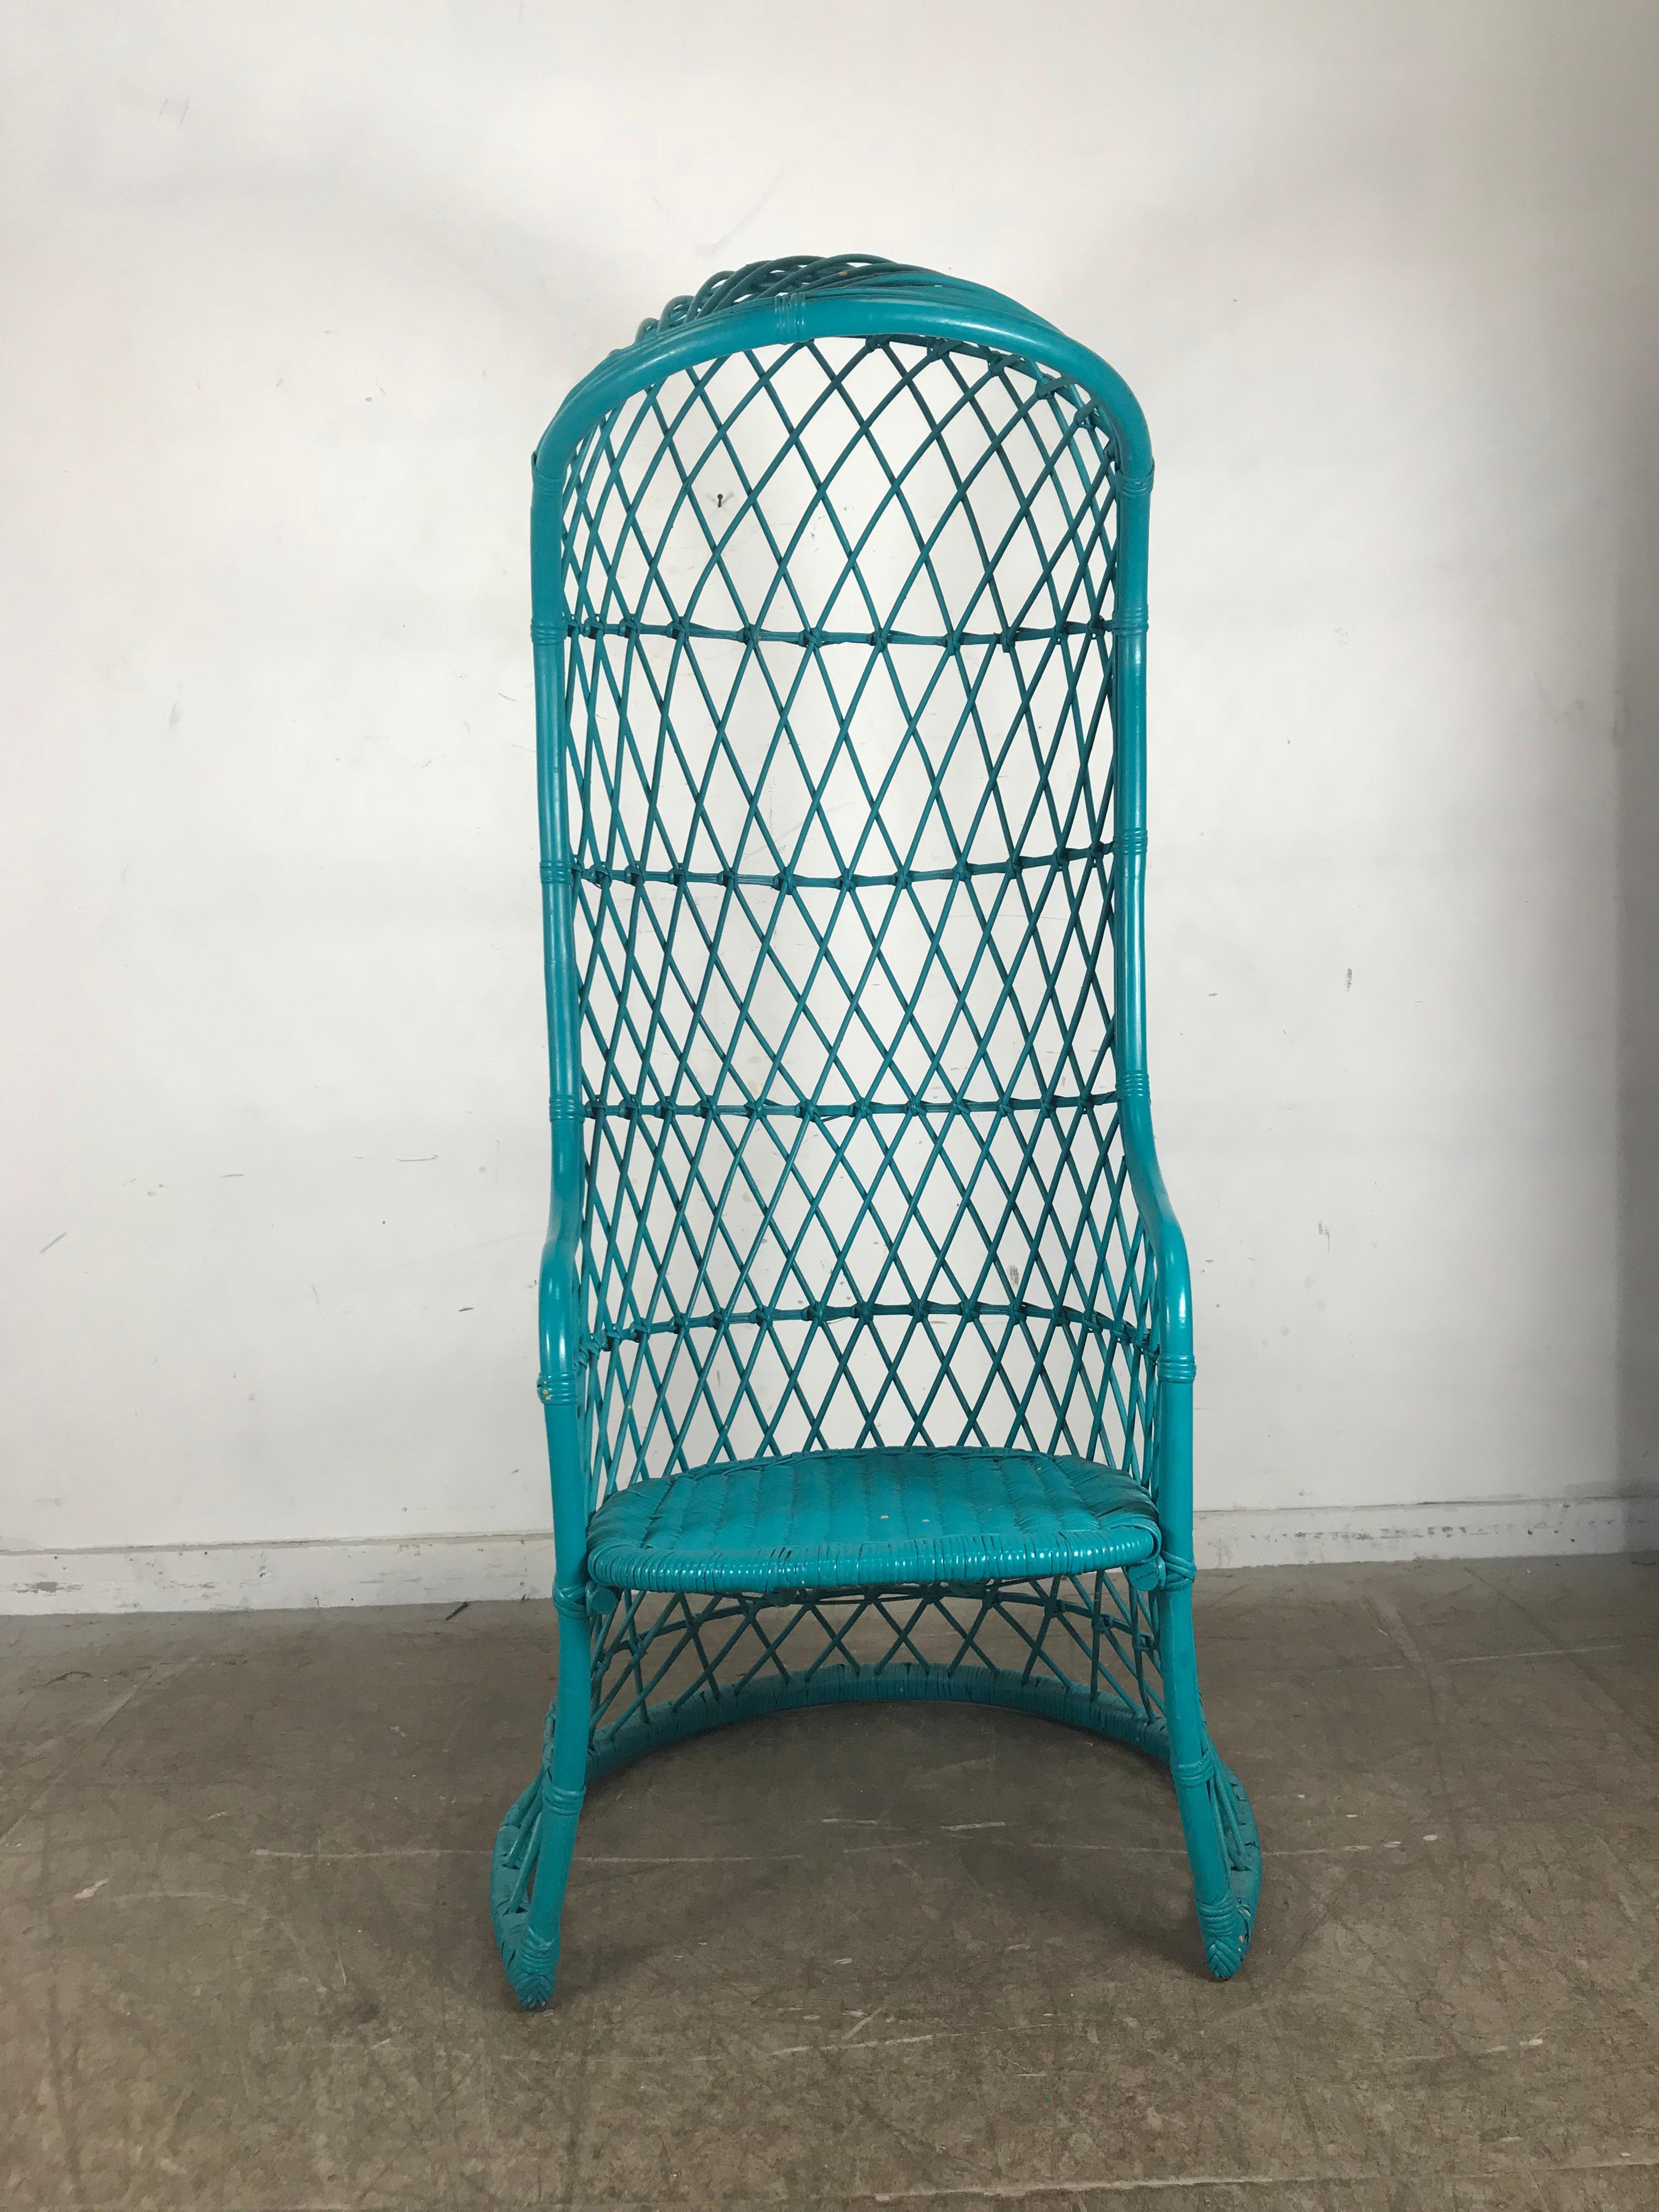 Unusual modernist hooded canopy wicker chair painted electric turquoise blue. Structurally sound. Comfortable great accent piece. Exterior garden or interior. Hand delivery avail to New York City or anywhere en route from Buffalo NY.